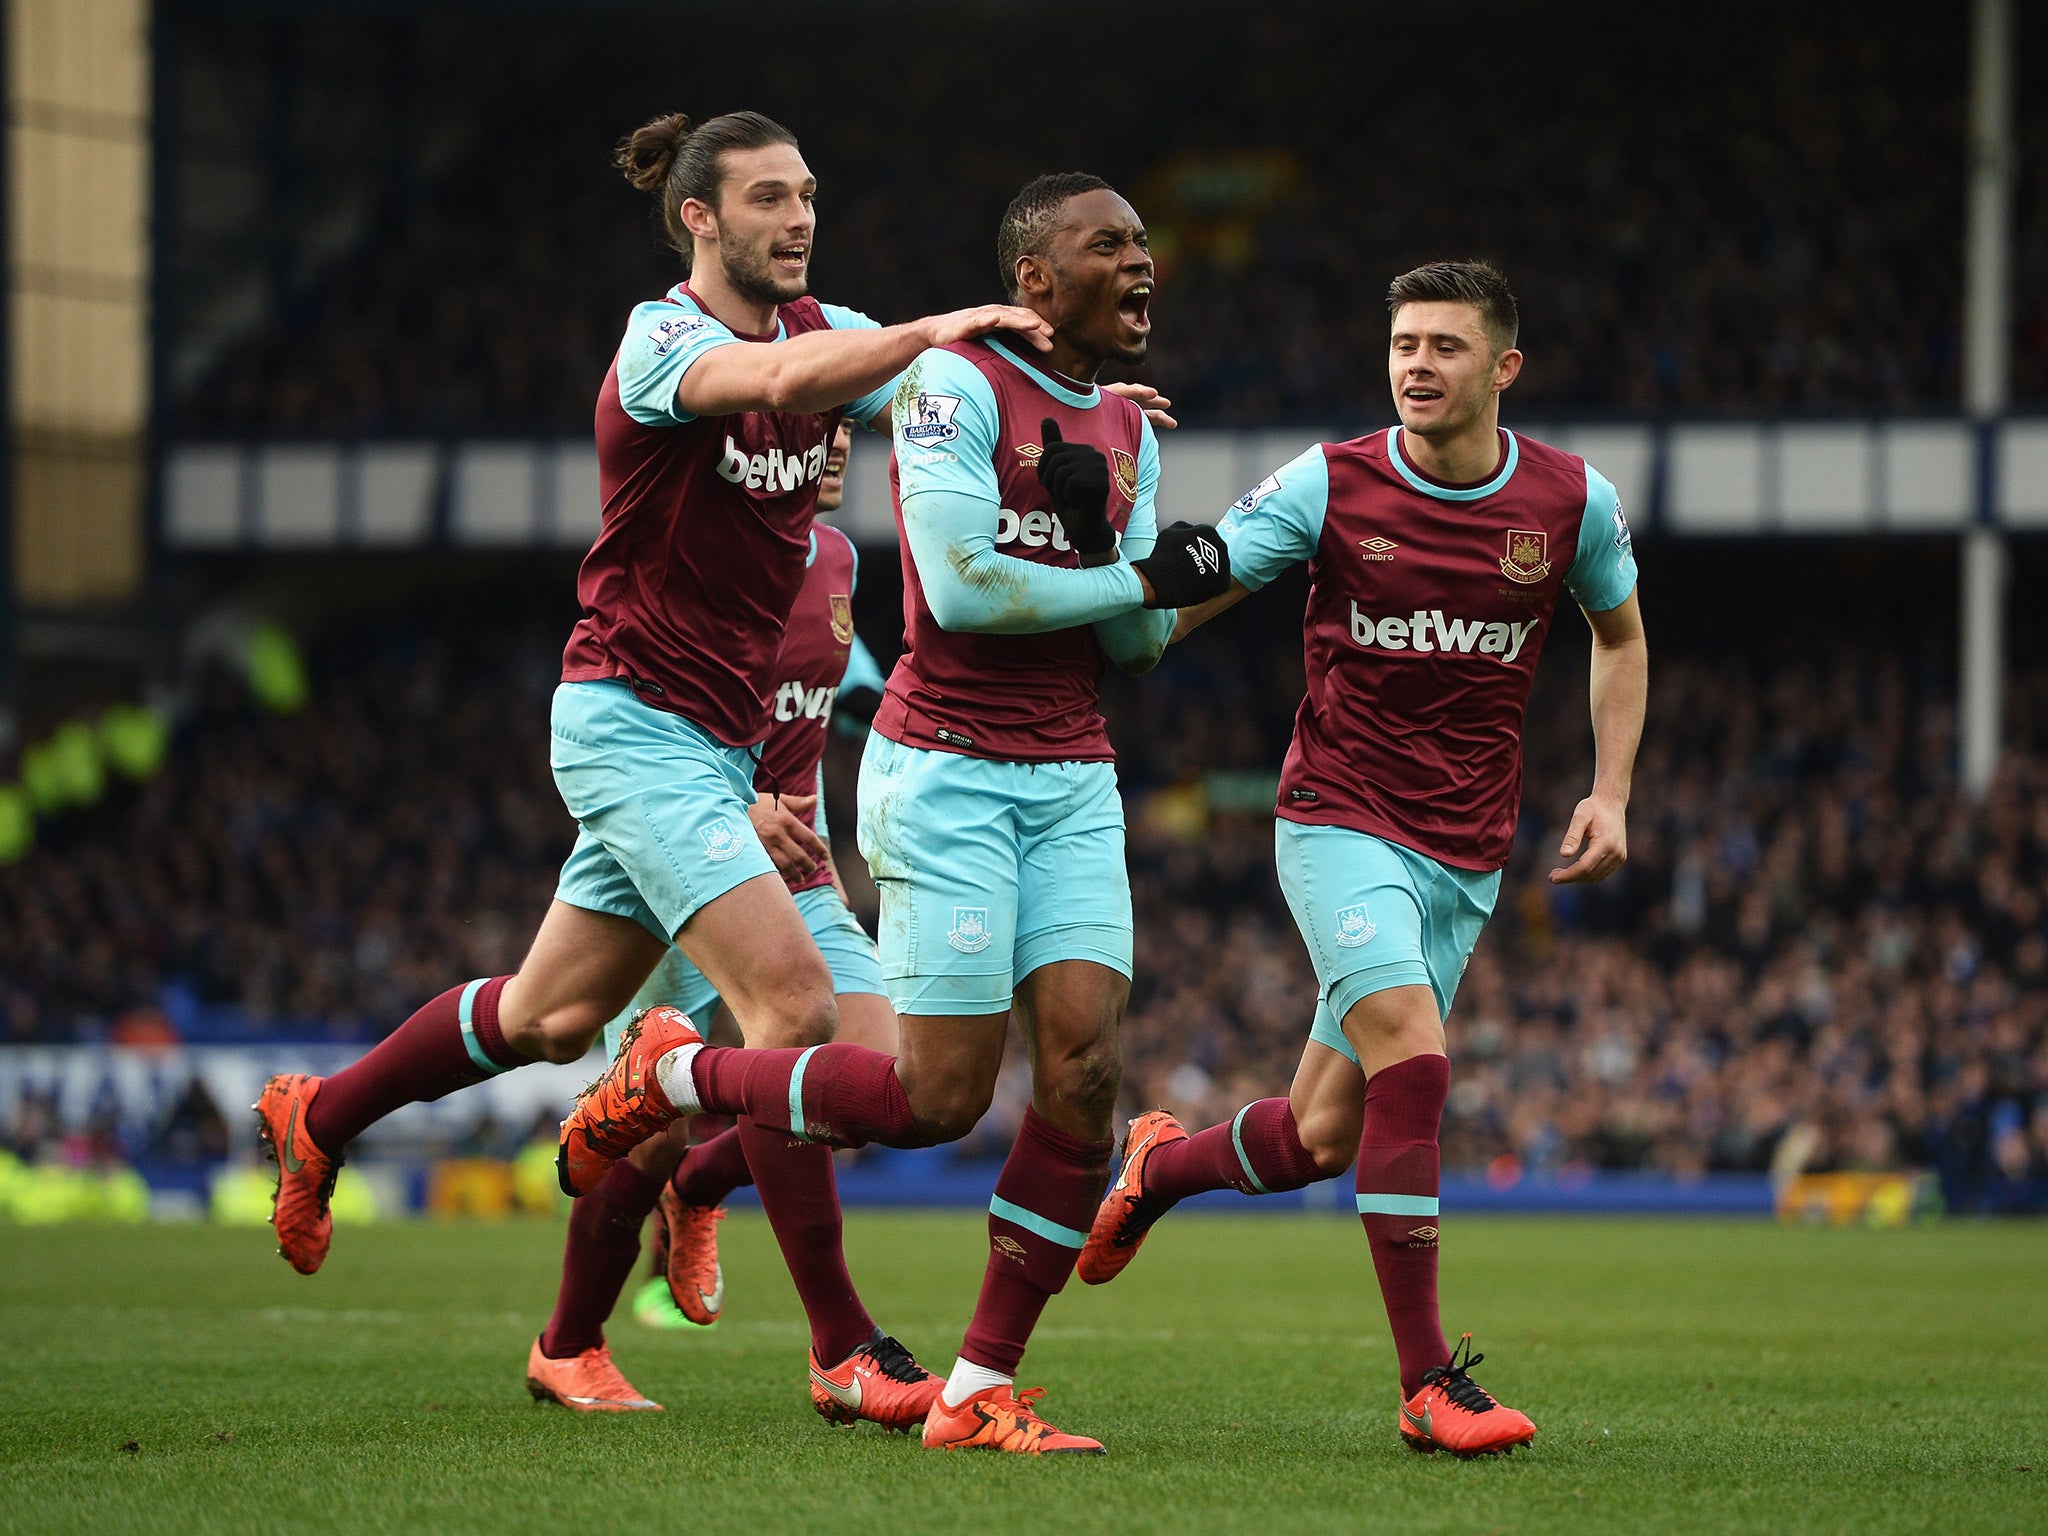 Diafra Sakho was reported to have been upset at being dropped for Andy Carroll